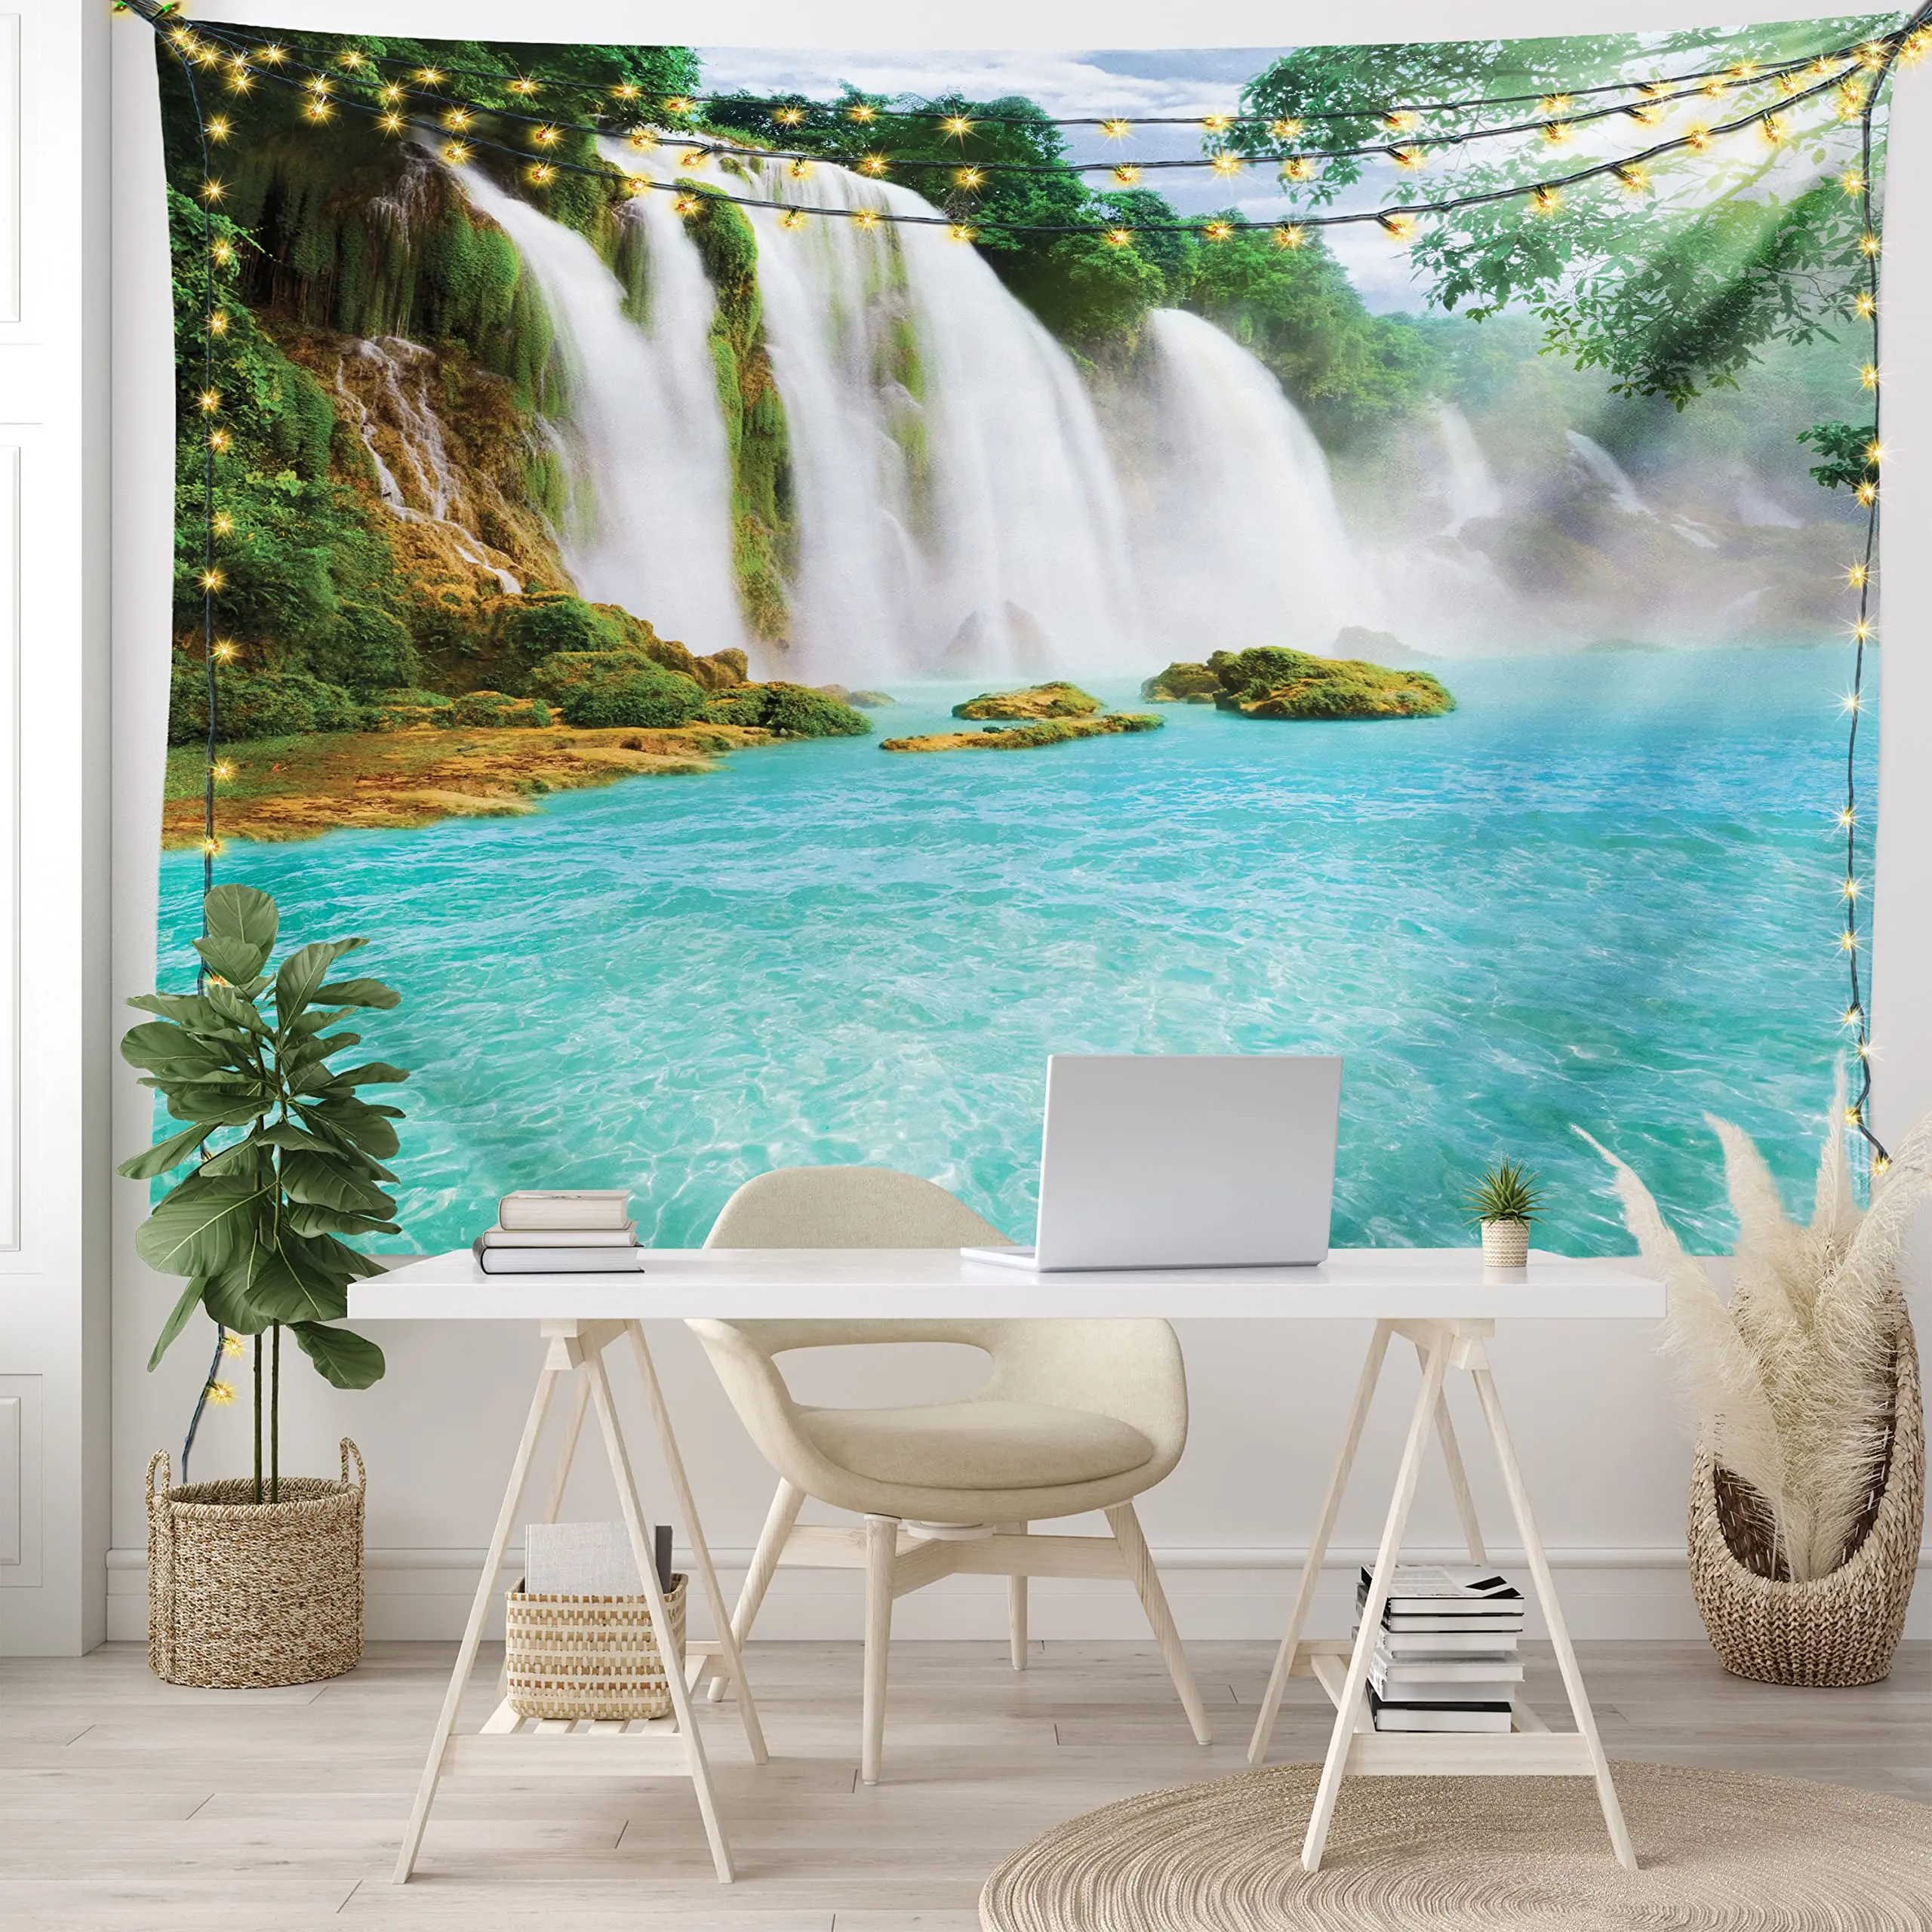 

Waterfall Tapestry Wall Hanging,Waterfalls In The Forest Scenery Nature Jungle Tapestry for Bedroom Living Room Dorm Home Decor